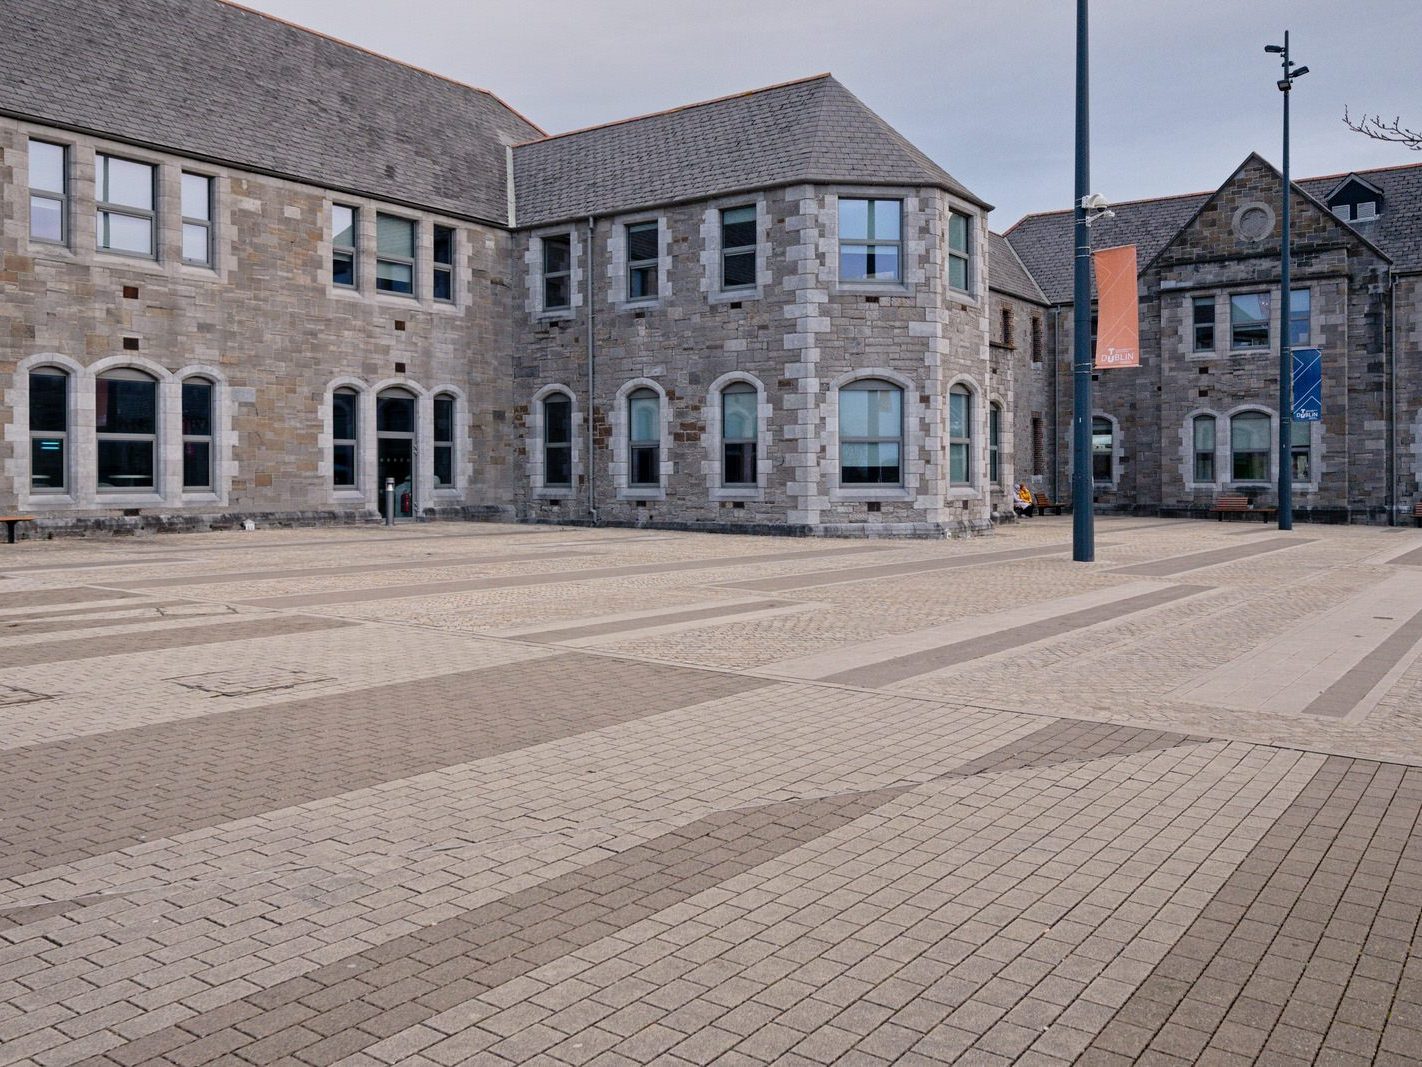 I VISITED THE GRANGEGORMAN UNIVERSITY CAMPUS [THERE WAS NO SIGN OF CHRISTMAS CELEBRATIONS THERE]-226050-1